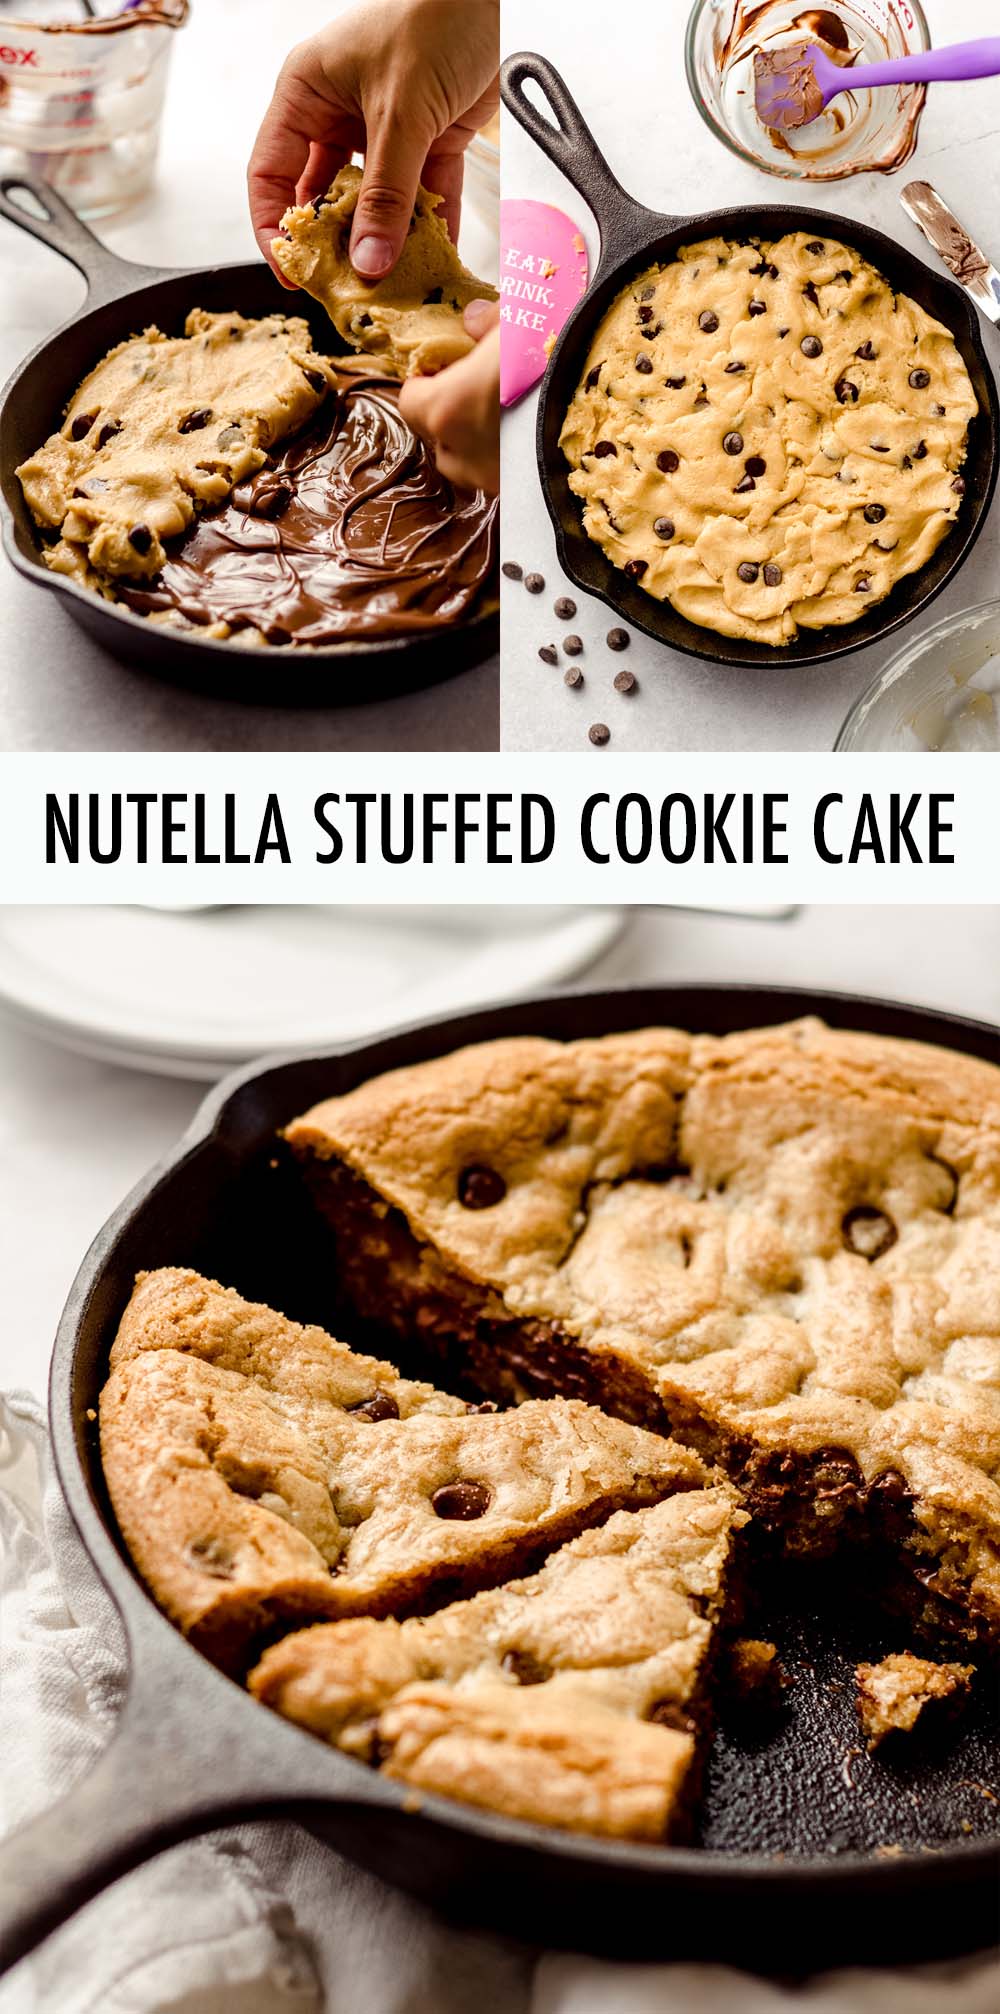 This Nutella stuffed chocolate chip cookie cake is baked in a skillet so you can dig in with some spoons and ice cream or cut it into gooey slices of plated cookie cake. However you serve it, this epic cookie cake is bound to satisfy any Nutella lover's sweet tooth! via @frshaprilflours